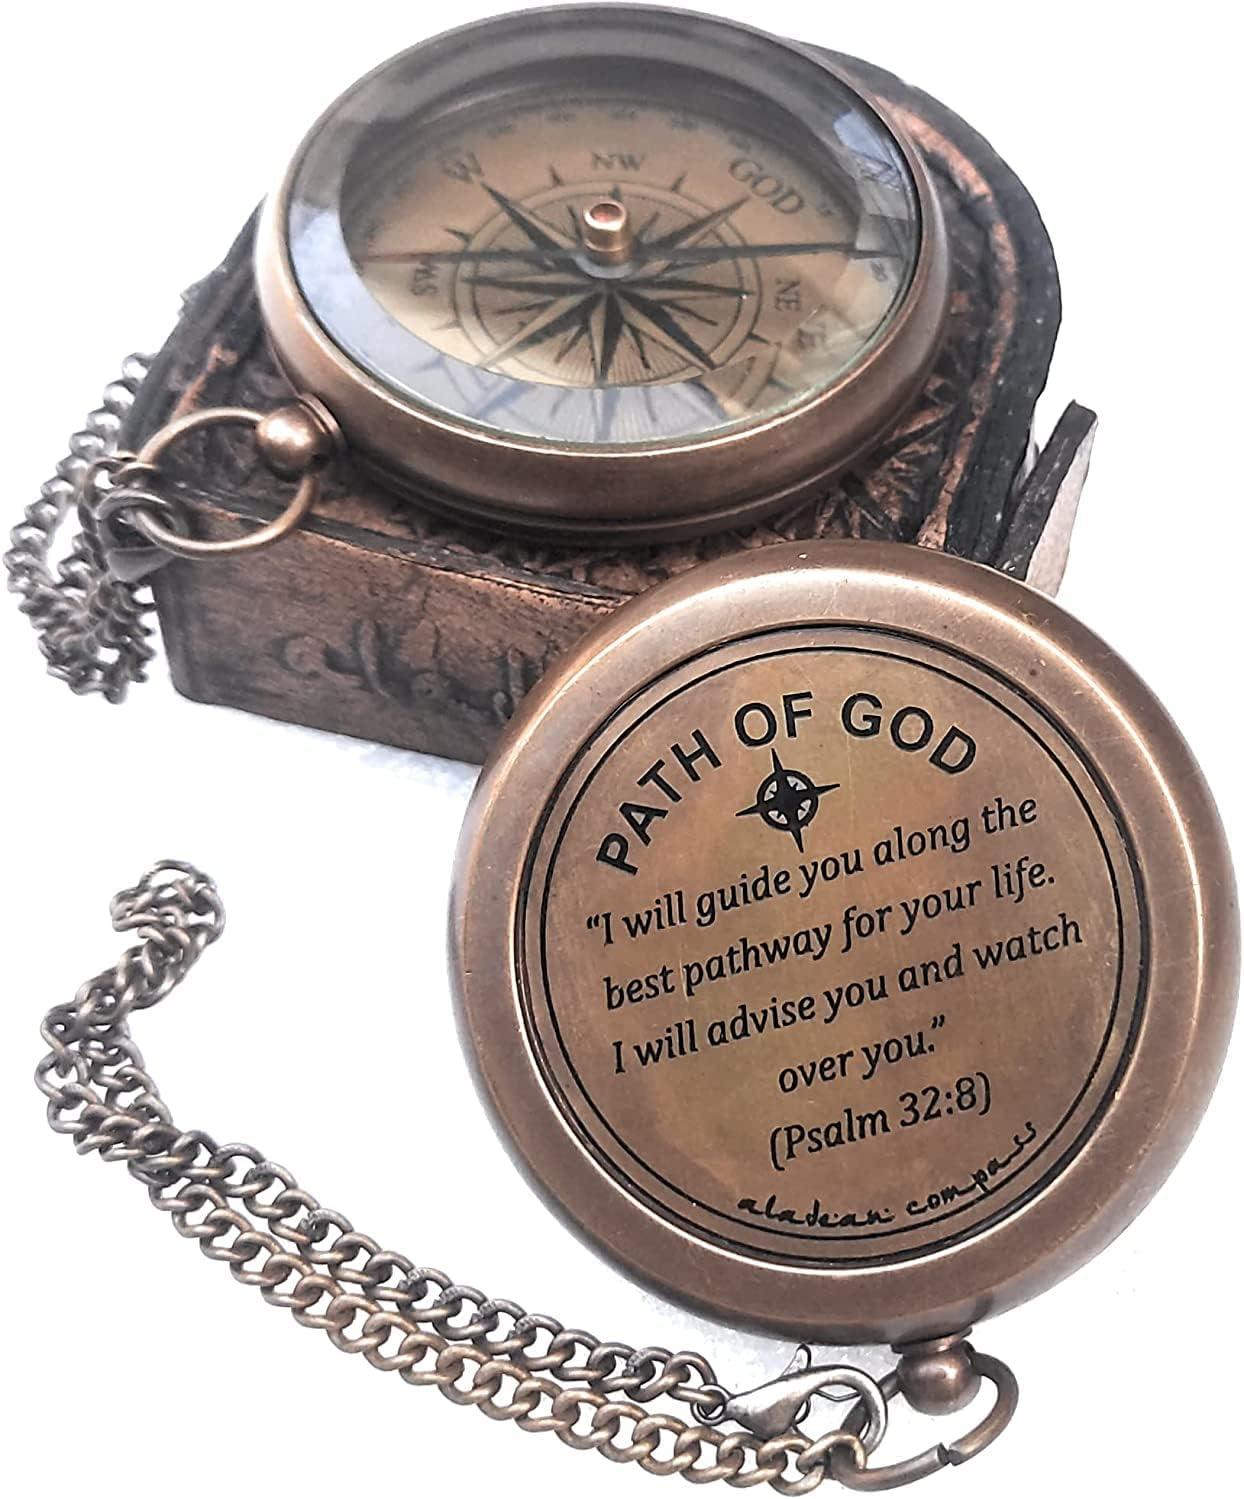 30 Best Christian Gifts for Men - Religious Gifts (2022) - 365Canvas Blog